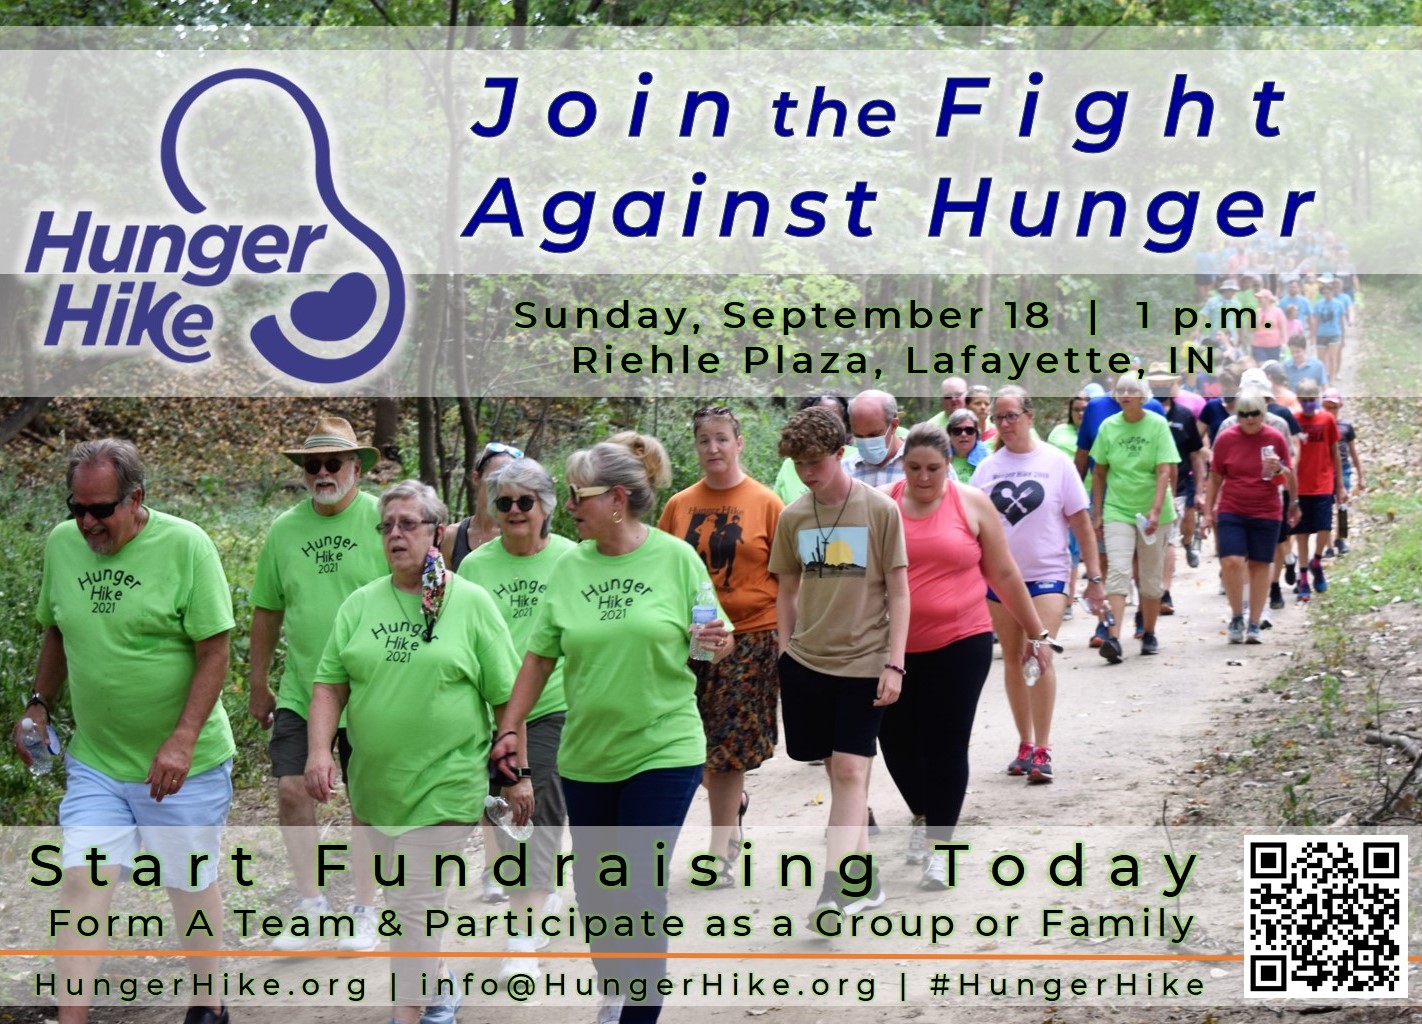 Hilltown Families - HIKING/FOOD SECURITY The Amherst Survival Center's  monthly long Hike for Hunger Challenge began this past Sunday. Support food  security in our region while taking to the great outdoors through